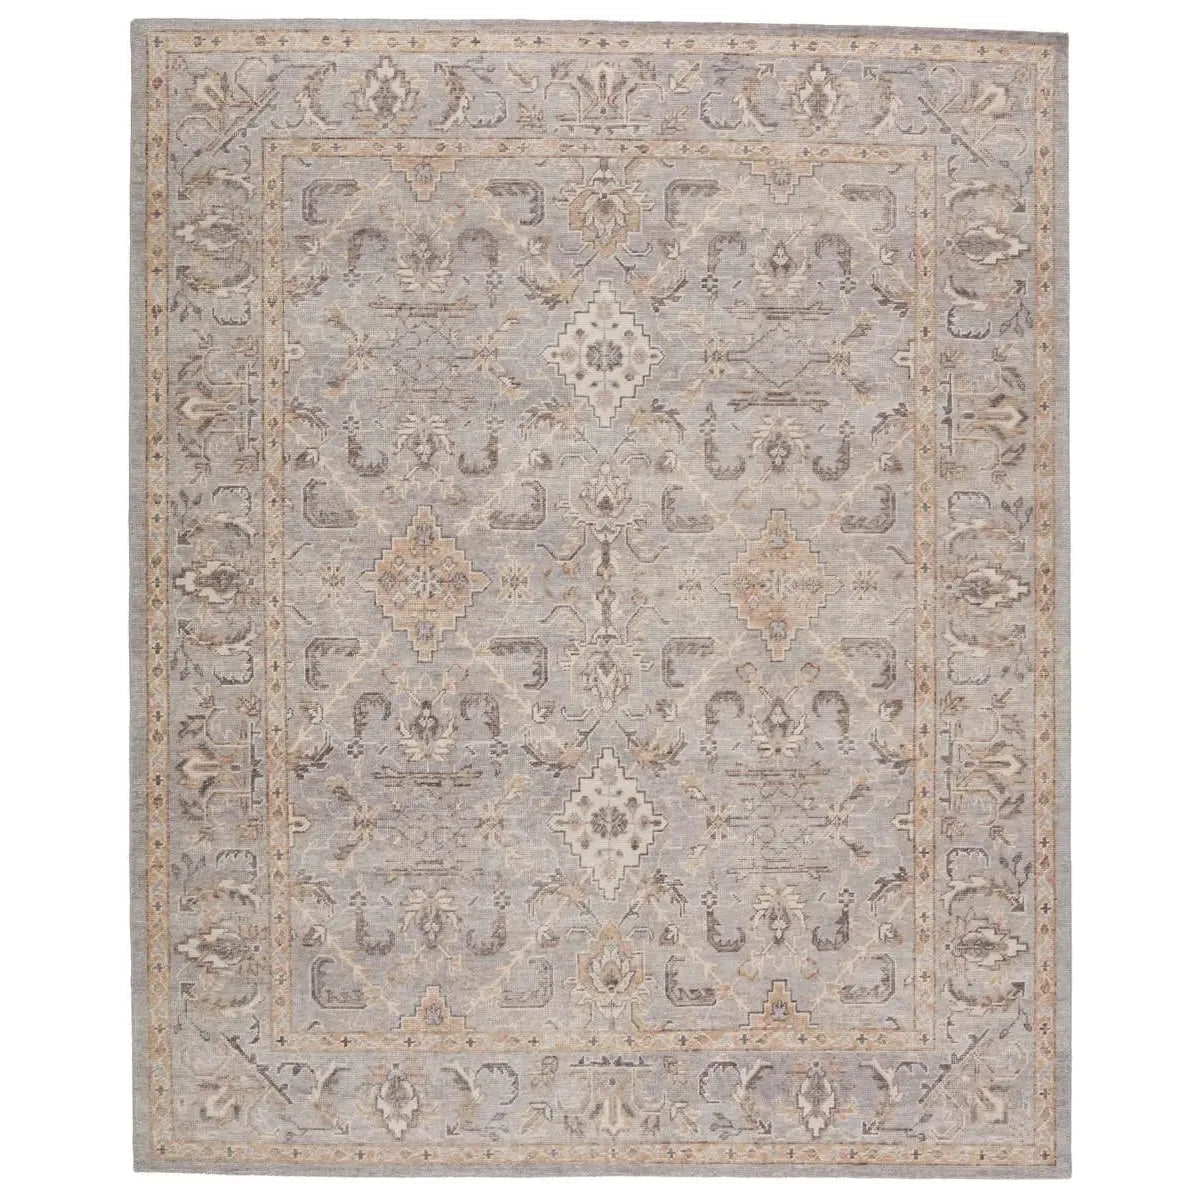 The Revolution Wyndham rug is inspired by traditional style and beautifully detailed antique textile designs. The hand-knotted Wyndham area rug showcases a classic motif in neutral tones of gray and warm tan. Amethyst Home provides interior design services, furniture, rugs, and lighting in the Kansas City metro area.